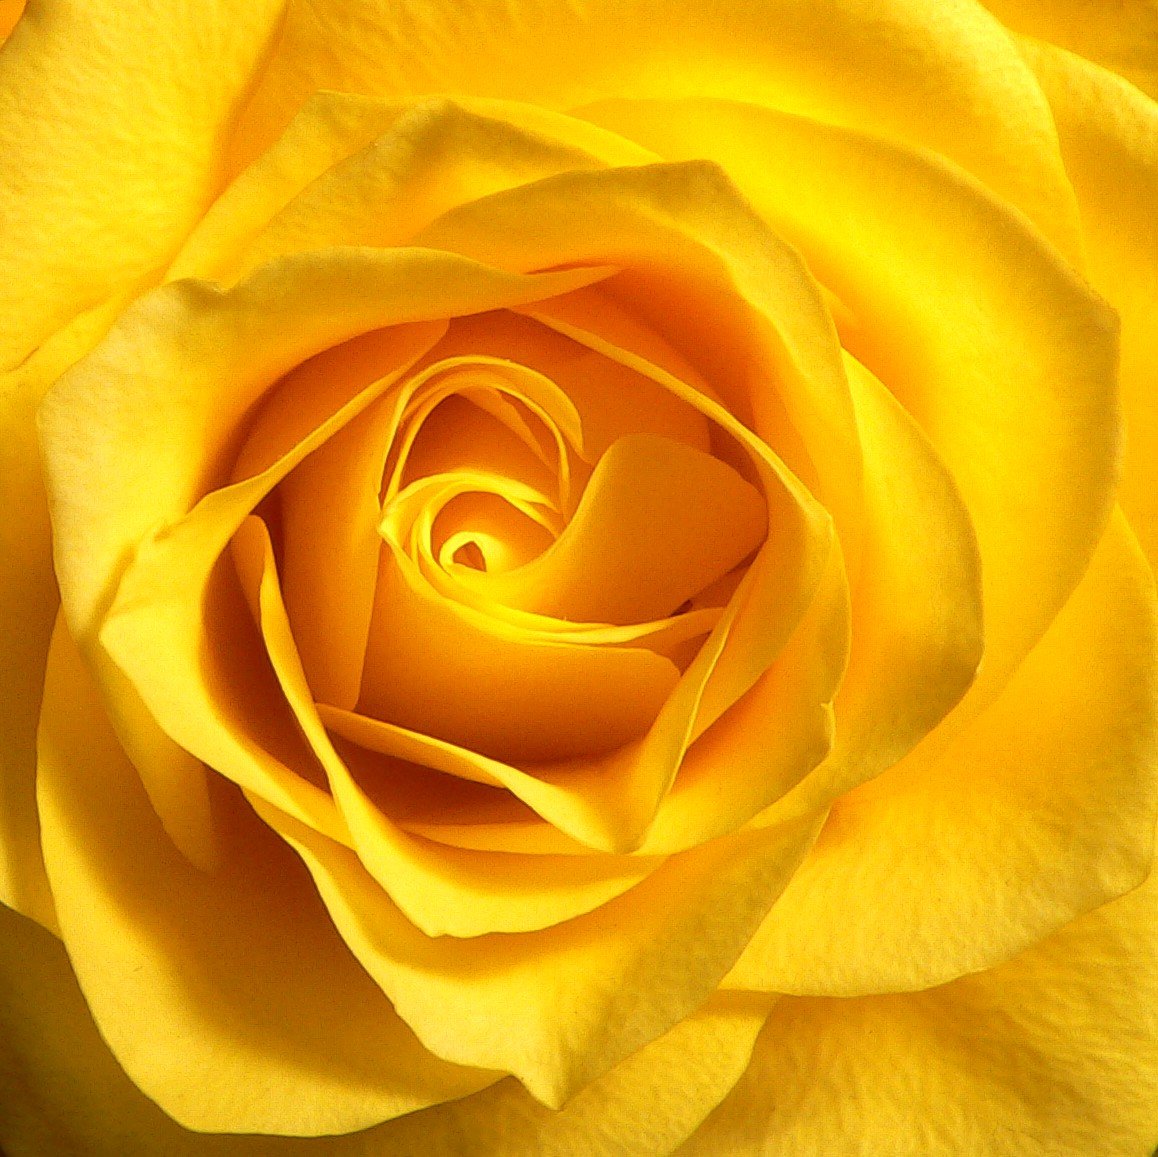 a close up image of the inside of a rose